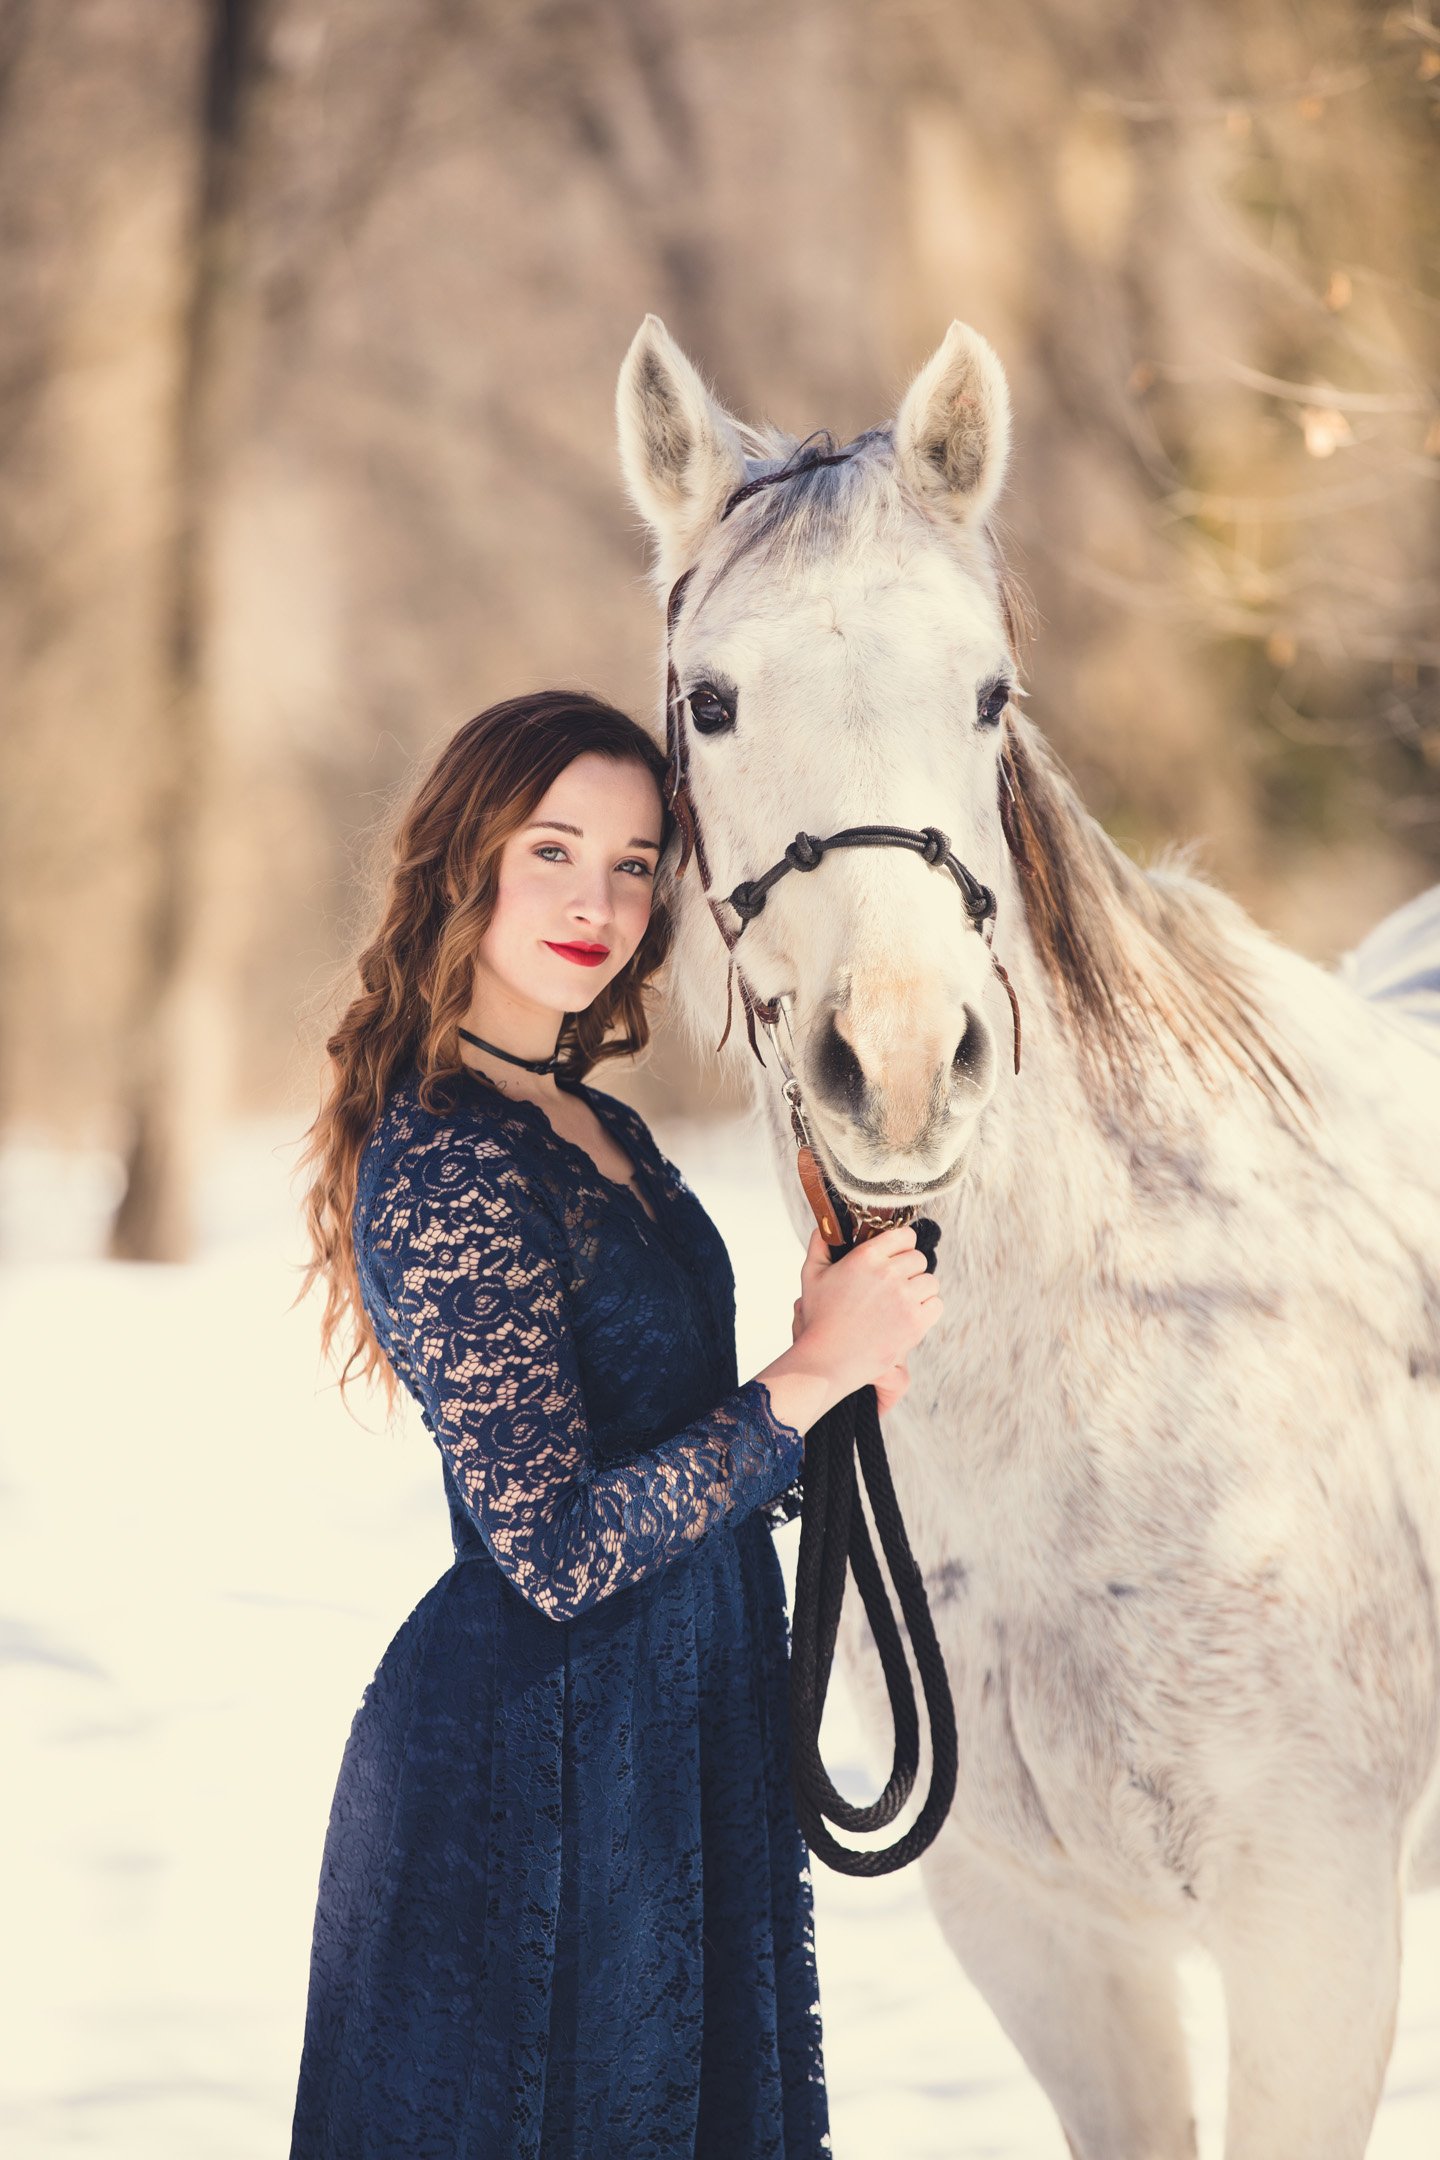 White horse in snow snuggled up to a girl in a navy blue dress posing for portrait